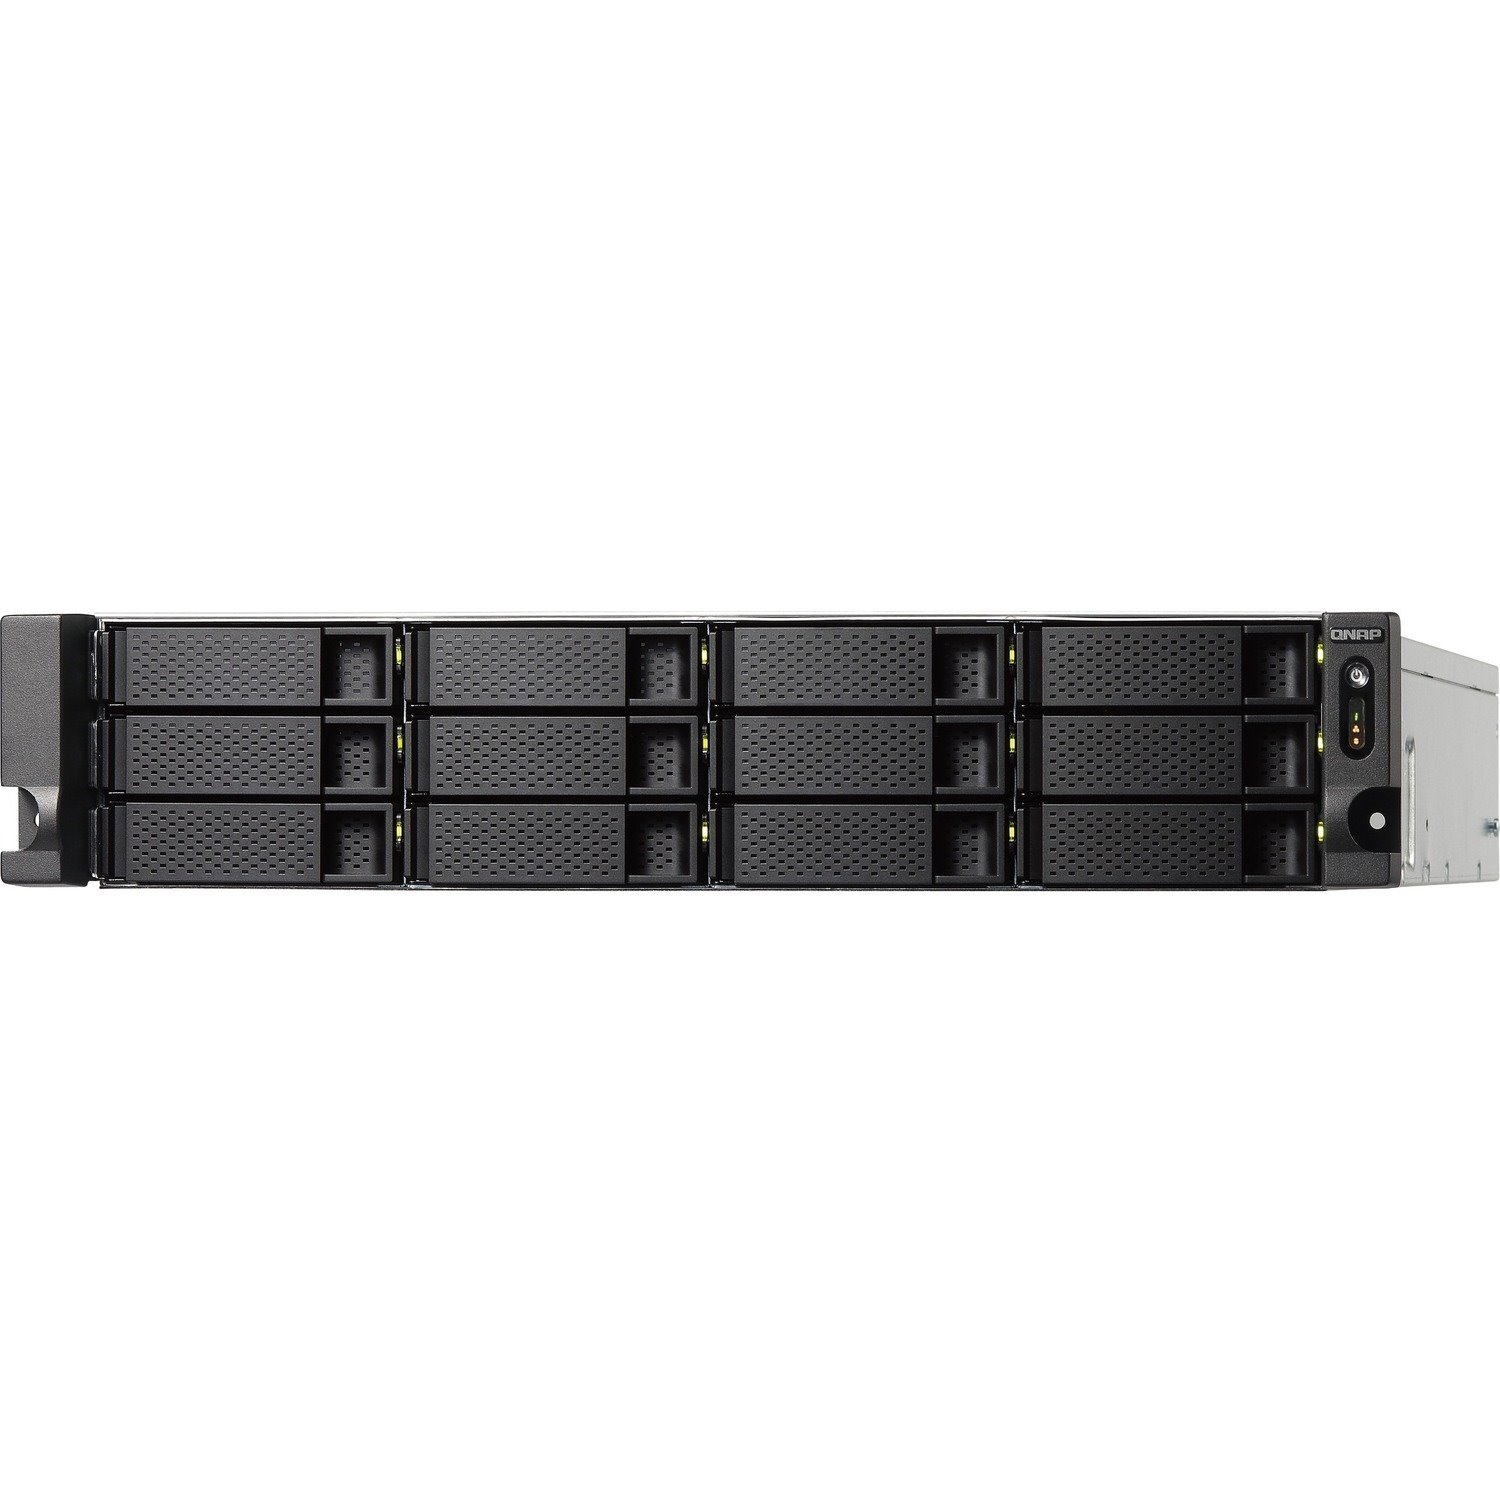 QNAP High-performance Quad-core NAS with Dual 10GbE SFP+ Ports